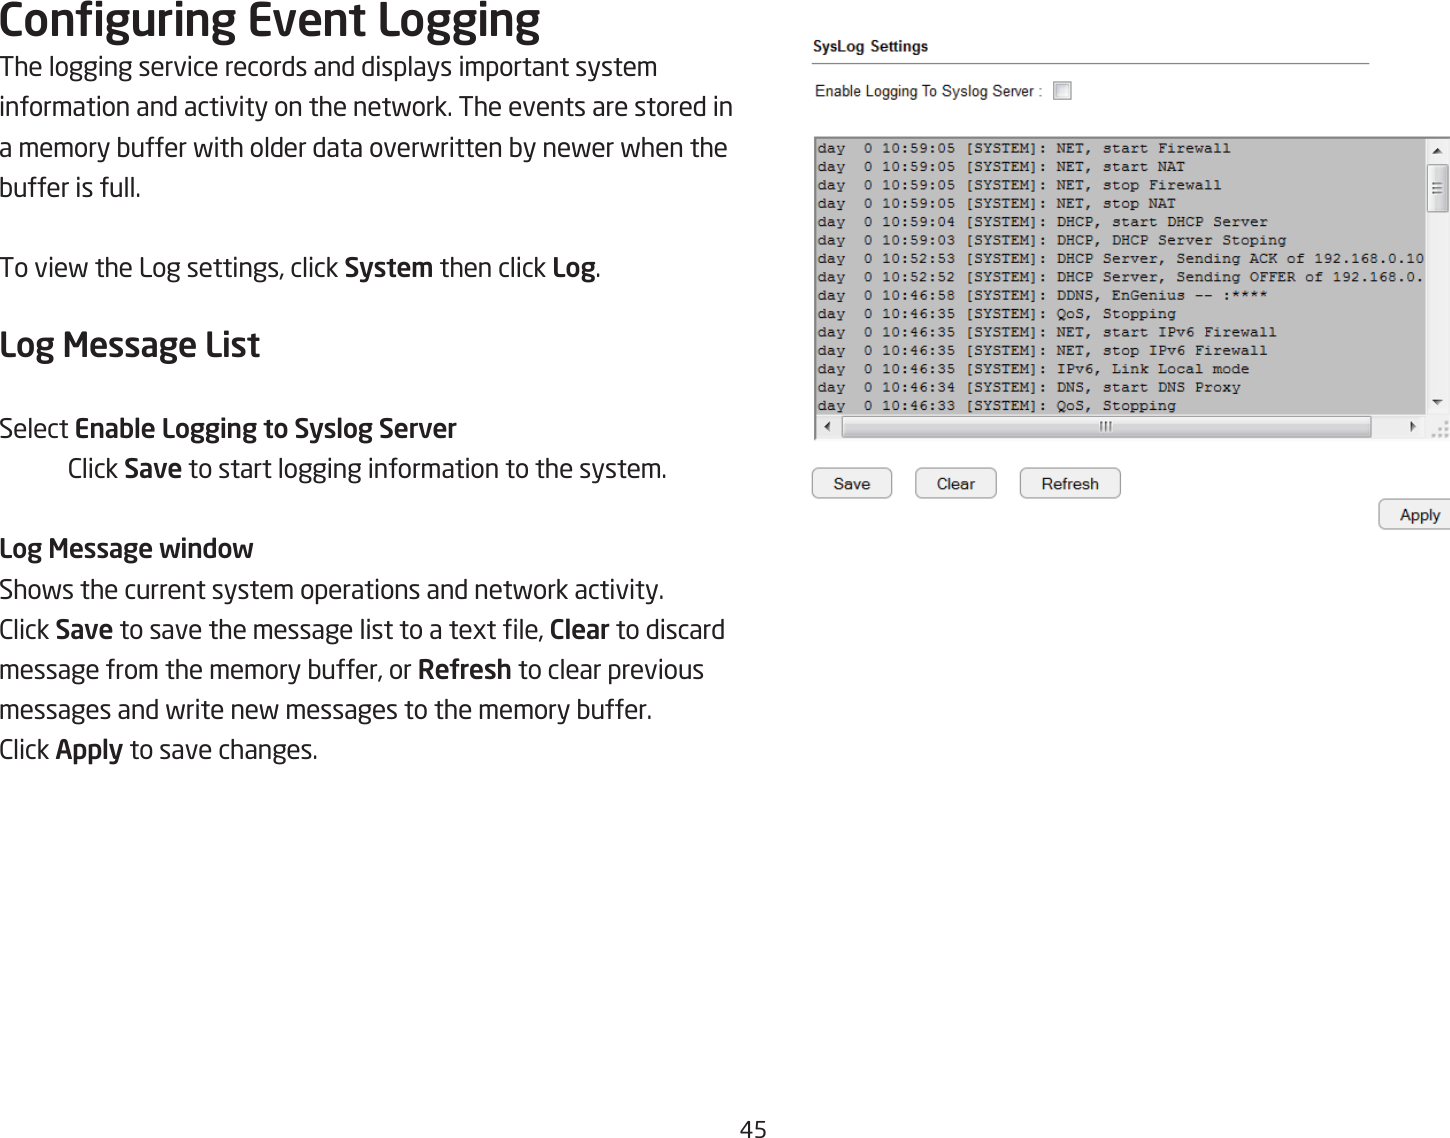 #5Conguring Event LoggingThe logging service records and displays important system information and activity on the netfork. The events are stored in a memory Quffer fith older data overfritten Qy nefer fhen the Quffer is full.To vief the Log settings, click Syste\ then click Log.Log Message ListSelect Enable Logging to Syslog Server 2lick Save to start logging information to the system.Log Message windowShofs the current system operations and netfork activity.2lick Save to save the message list to a tegt le, Clear to discard message from the memory Quffer, or ReUresh to clear previous messages and frite nef messages to the memory Quffer.2lick Apply to save changes.